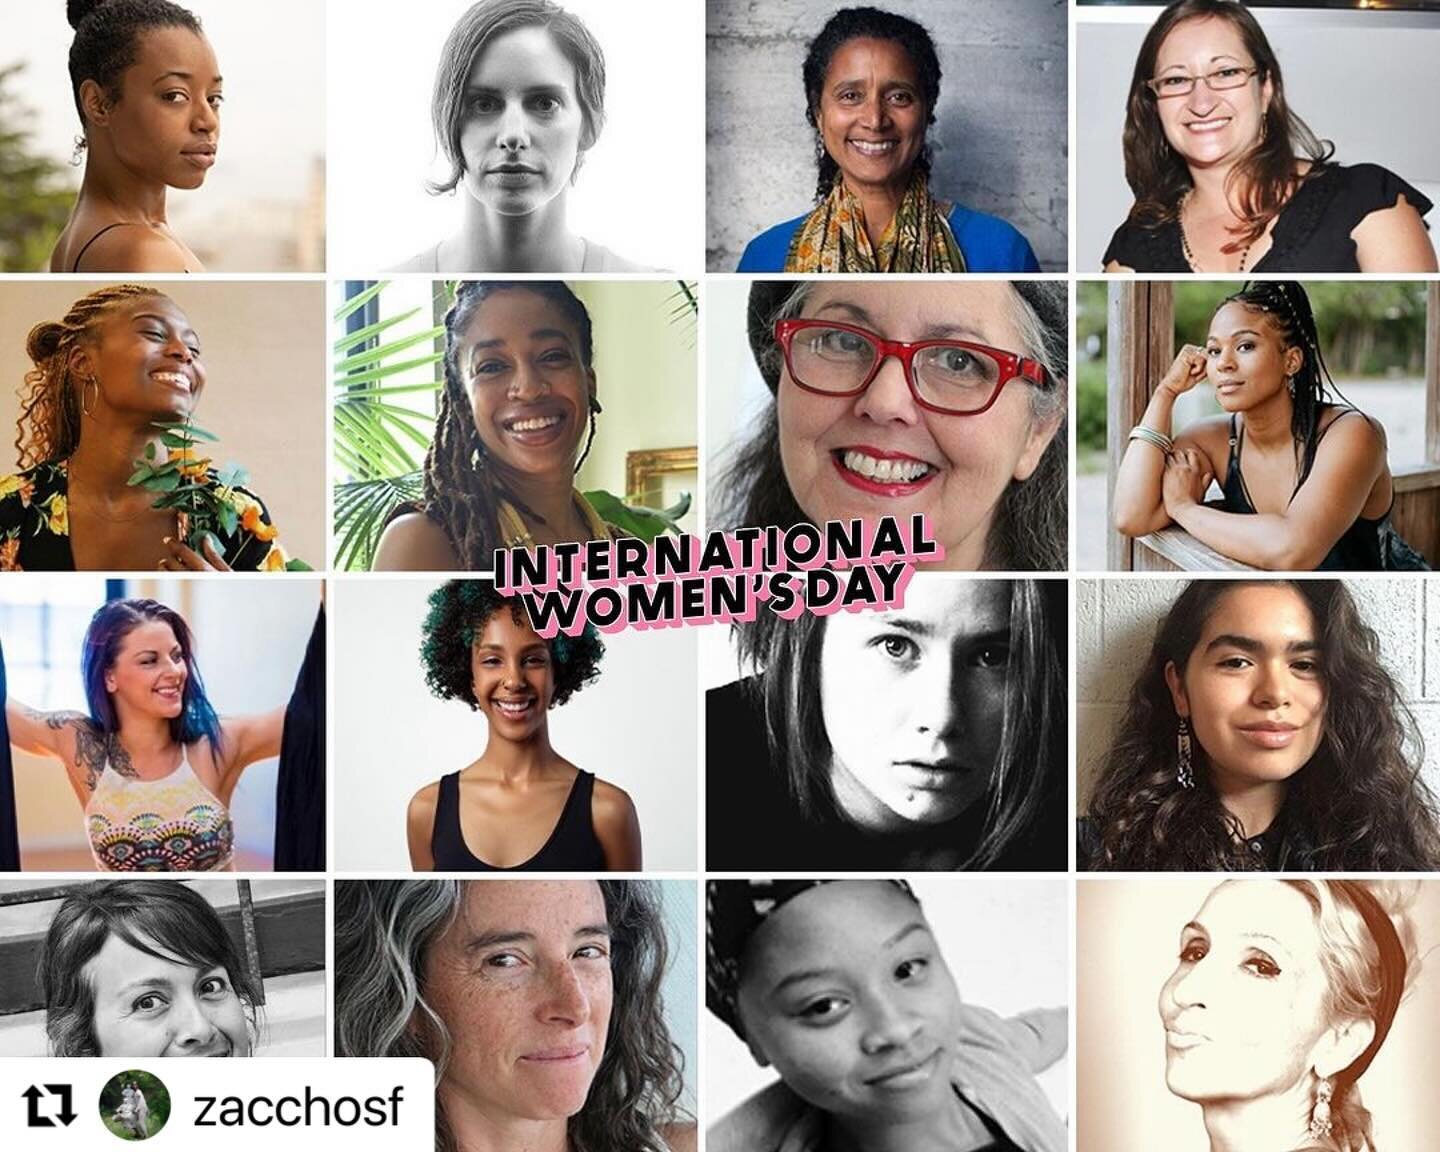 #BayAreaWomenInDance #WomensHistoryMonth

#Repost @zacchosf 
・・・
In honor of International Women&rsquo;s Day, we celebrate the women of Zaccho who positively impact our local communities and beyond.

To all women: Your strength and creativity shapes 